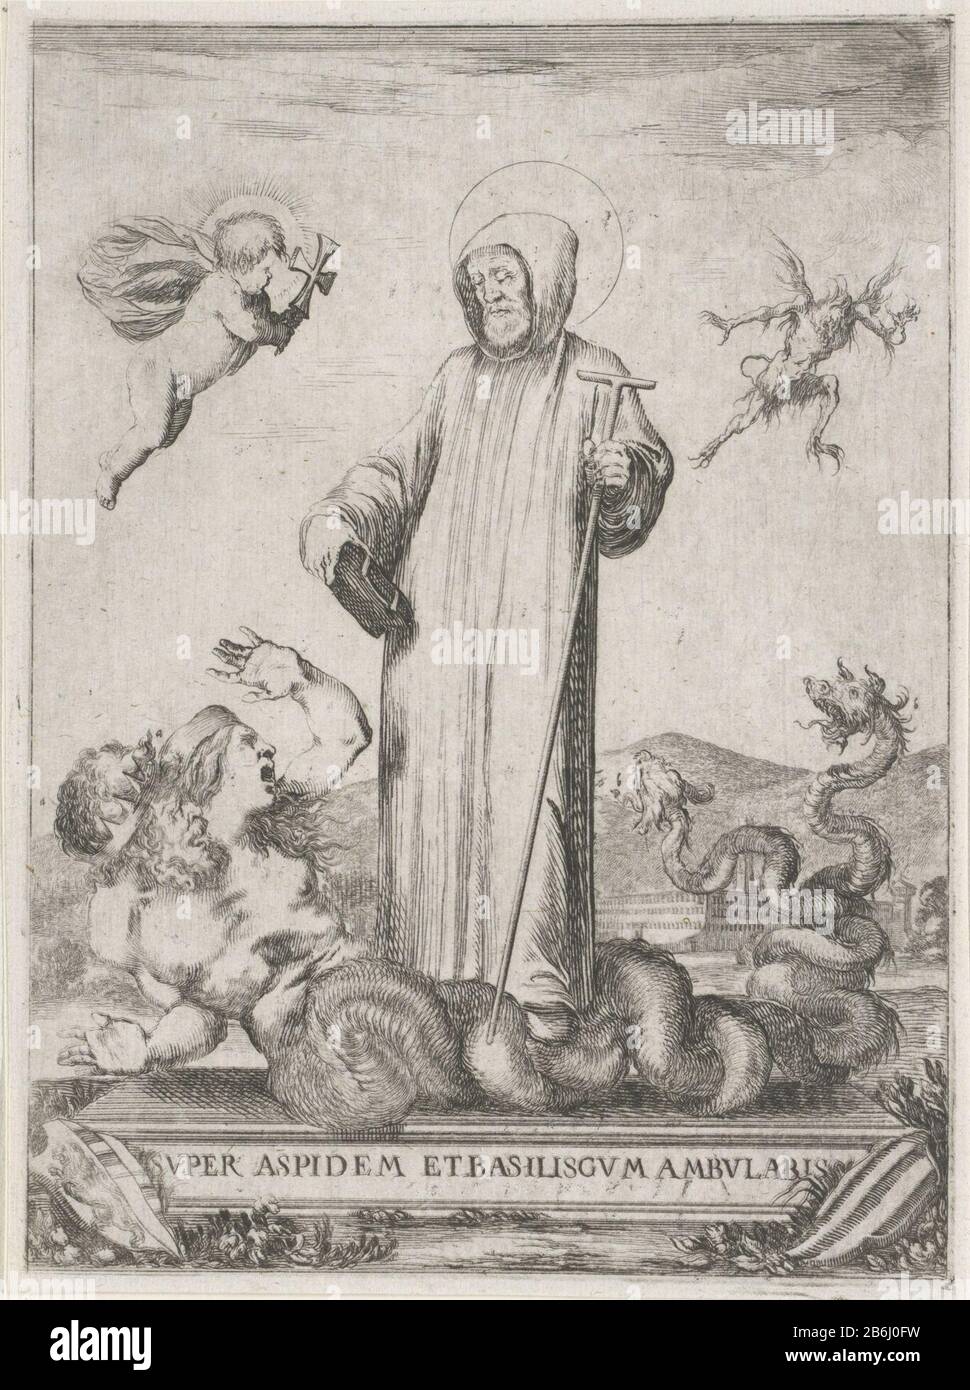 The saint John Gualbert trampled sample Super aspidem et basiliscum ambulabis (title object) Life of Saint John Gualbert (series title) The saint John Gualbert contained with a tau-rod and a bible. With his foot he tramples a monstrous creature with two human heads and a tail with two dragon heads. Left floats an angel with a cross on the right a devilish wezen. Manufacturer : printmaker: Stefano della Bella Dated: 1620 - 1664 Physical features: etching material: paper Technique: etching Dimensions: plate edge: H 188 mm × W 140 mmToelichtingPrent from a series of five prints on life of St. Joh Stock Photo